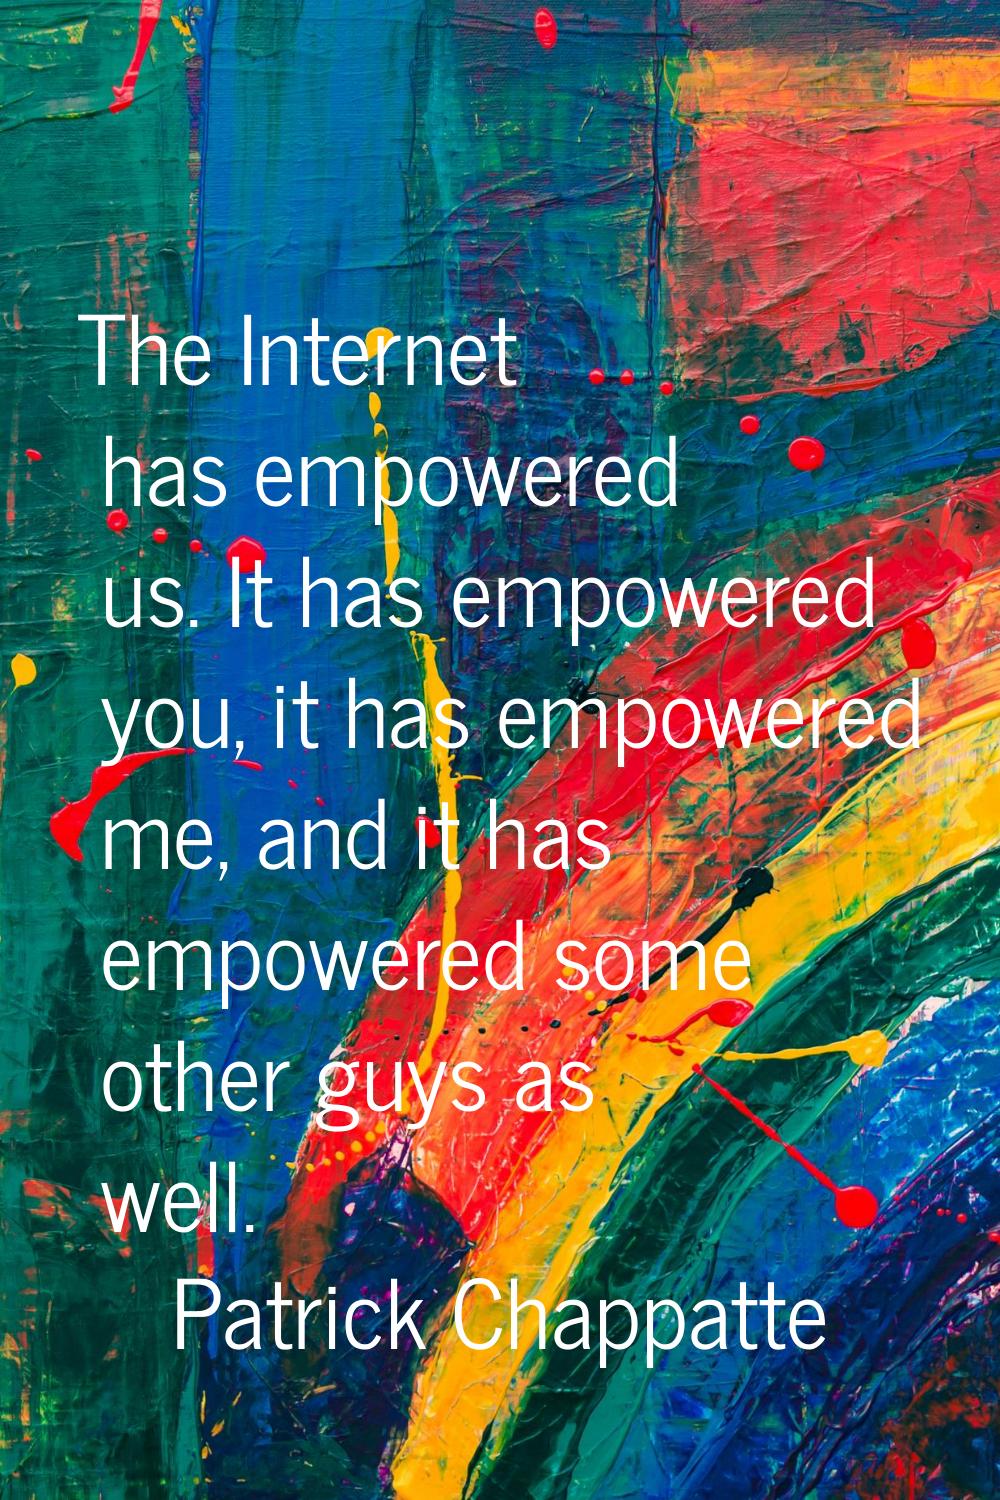 The Internet has empowered us. It has empowered you, it has empowered me, and it has empowered some